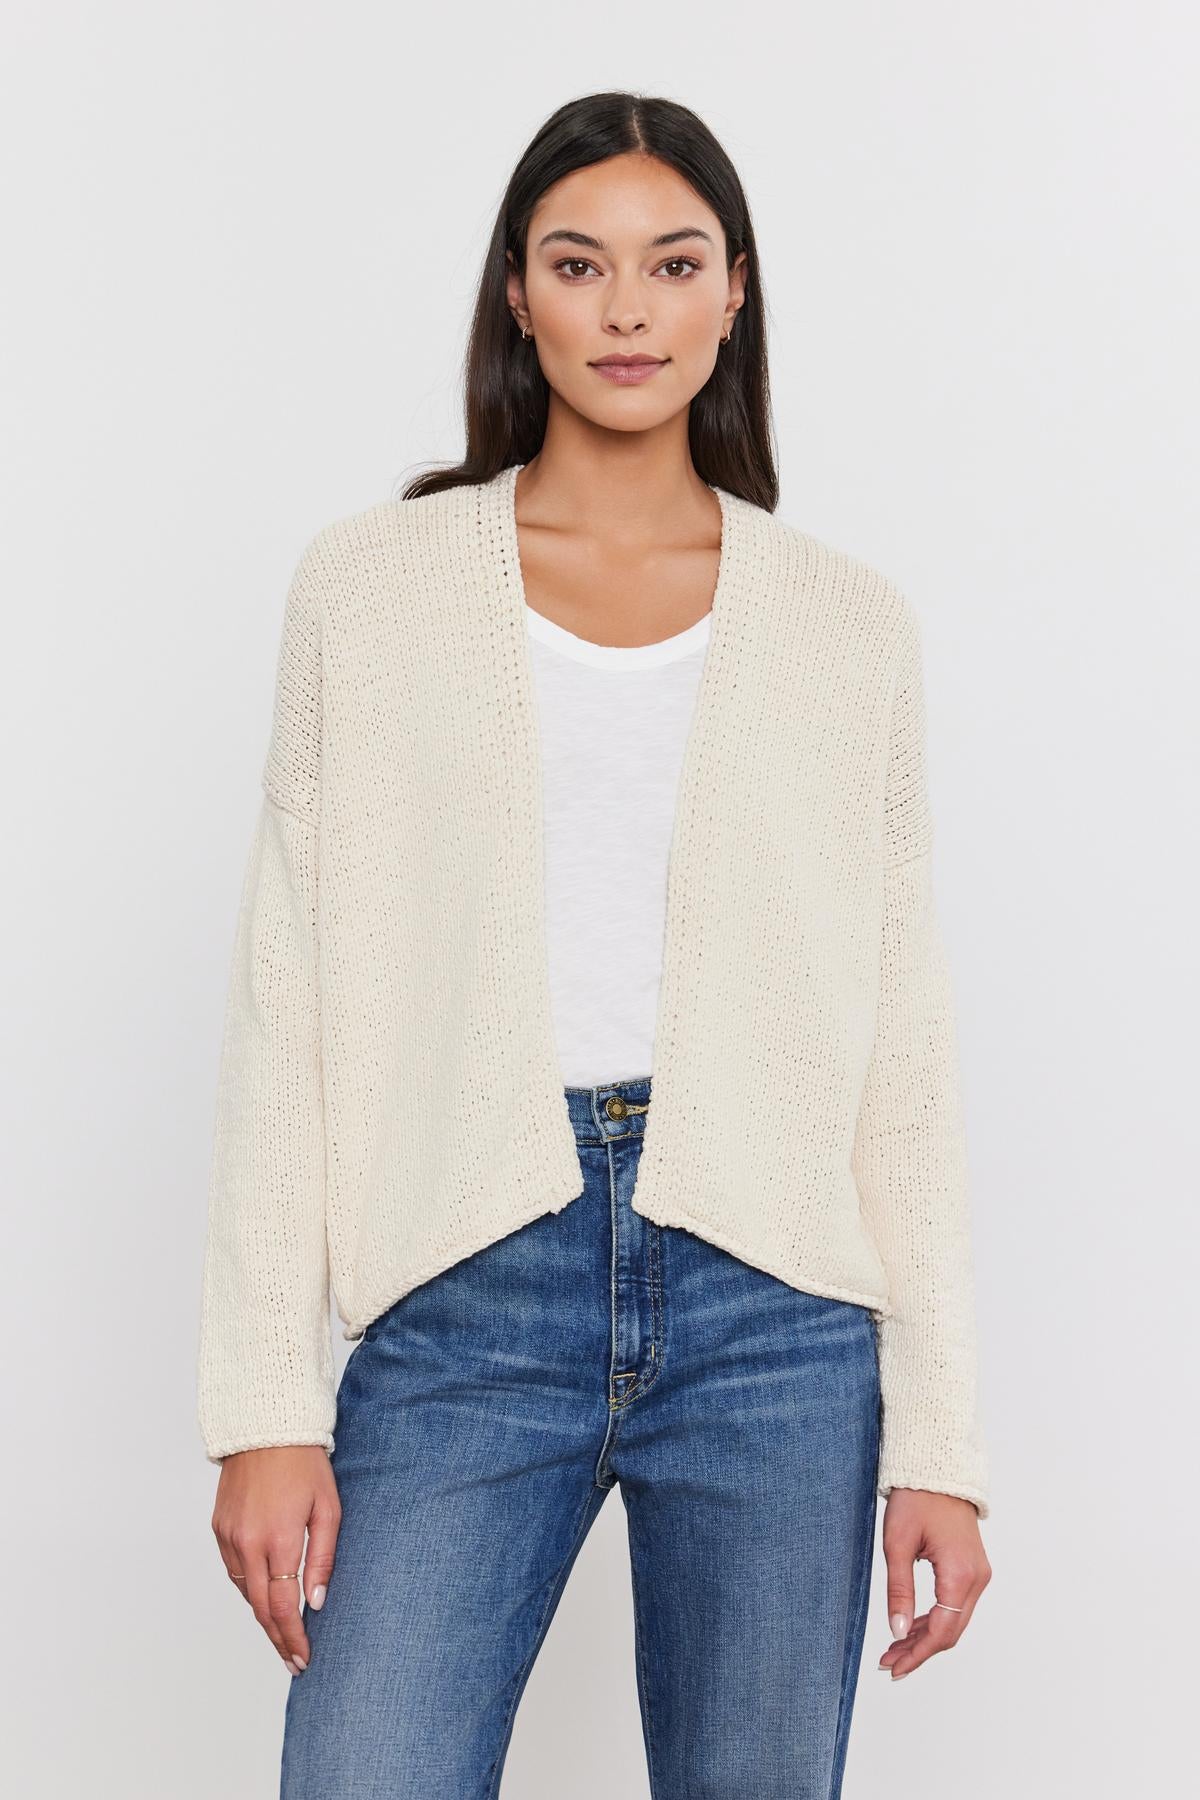 Woman in a Velvet by Graham & Spencer HOLLIE CARDIGAN, white t-shirt, and blue jeans standing against a plain background.-36752930406593